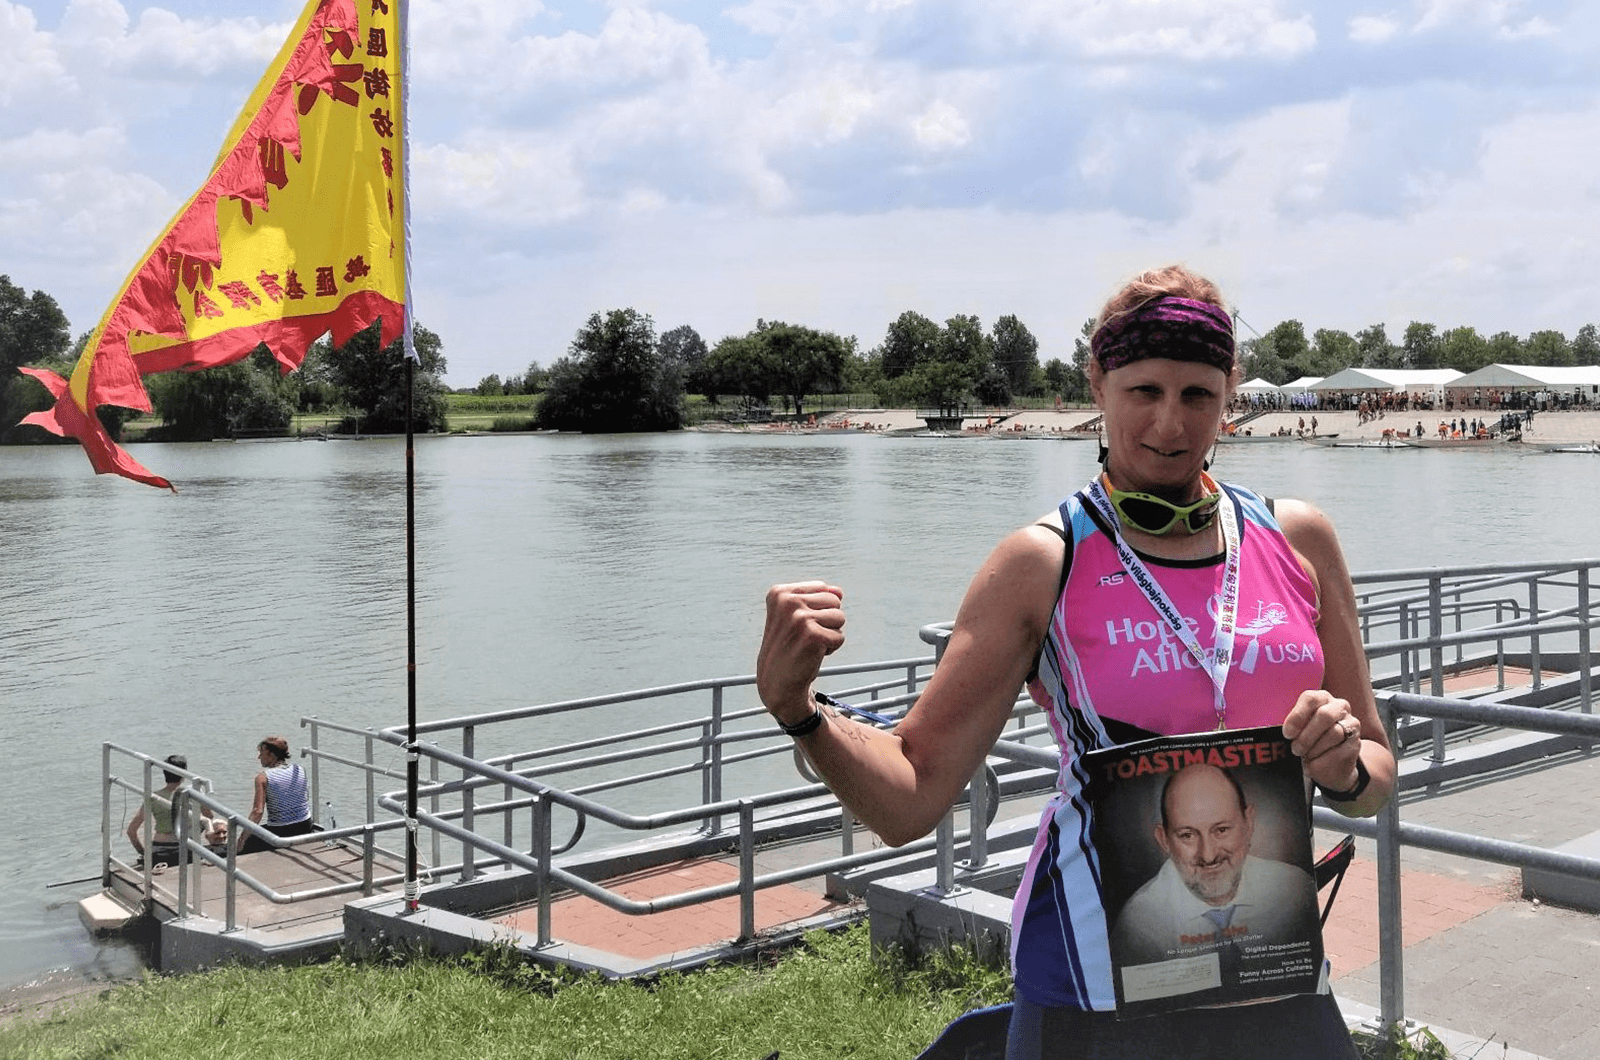 Kathy Myers of Philadelphia, Pennsylvania, competed in the International Dragon Boat Federation National Club Crew Championships in July 2018. She and her team earned the bronze medal in the short boat competition—a 500-meter race—in Szeged, Hungary! 